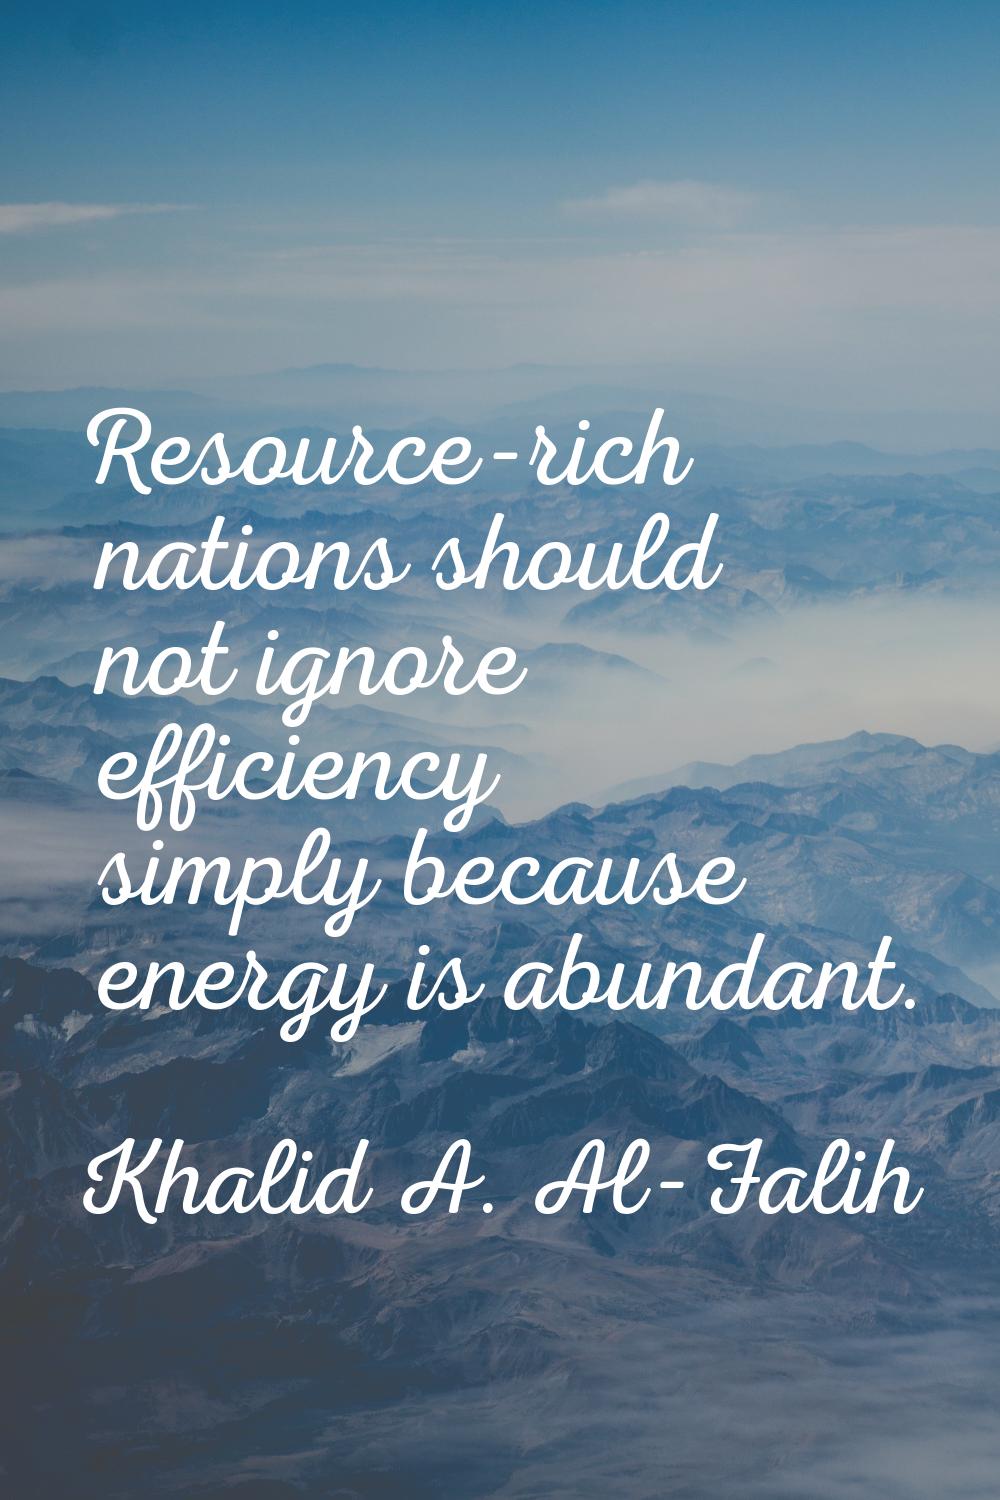 Resource-rich nations should not ignore efficiency simply because energy is abundant.